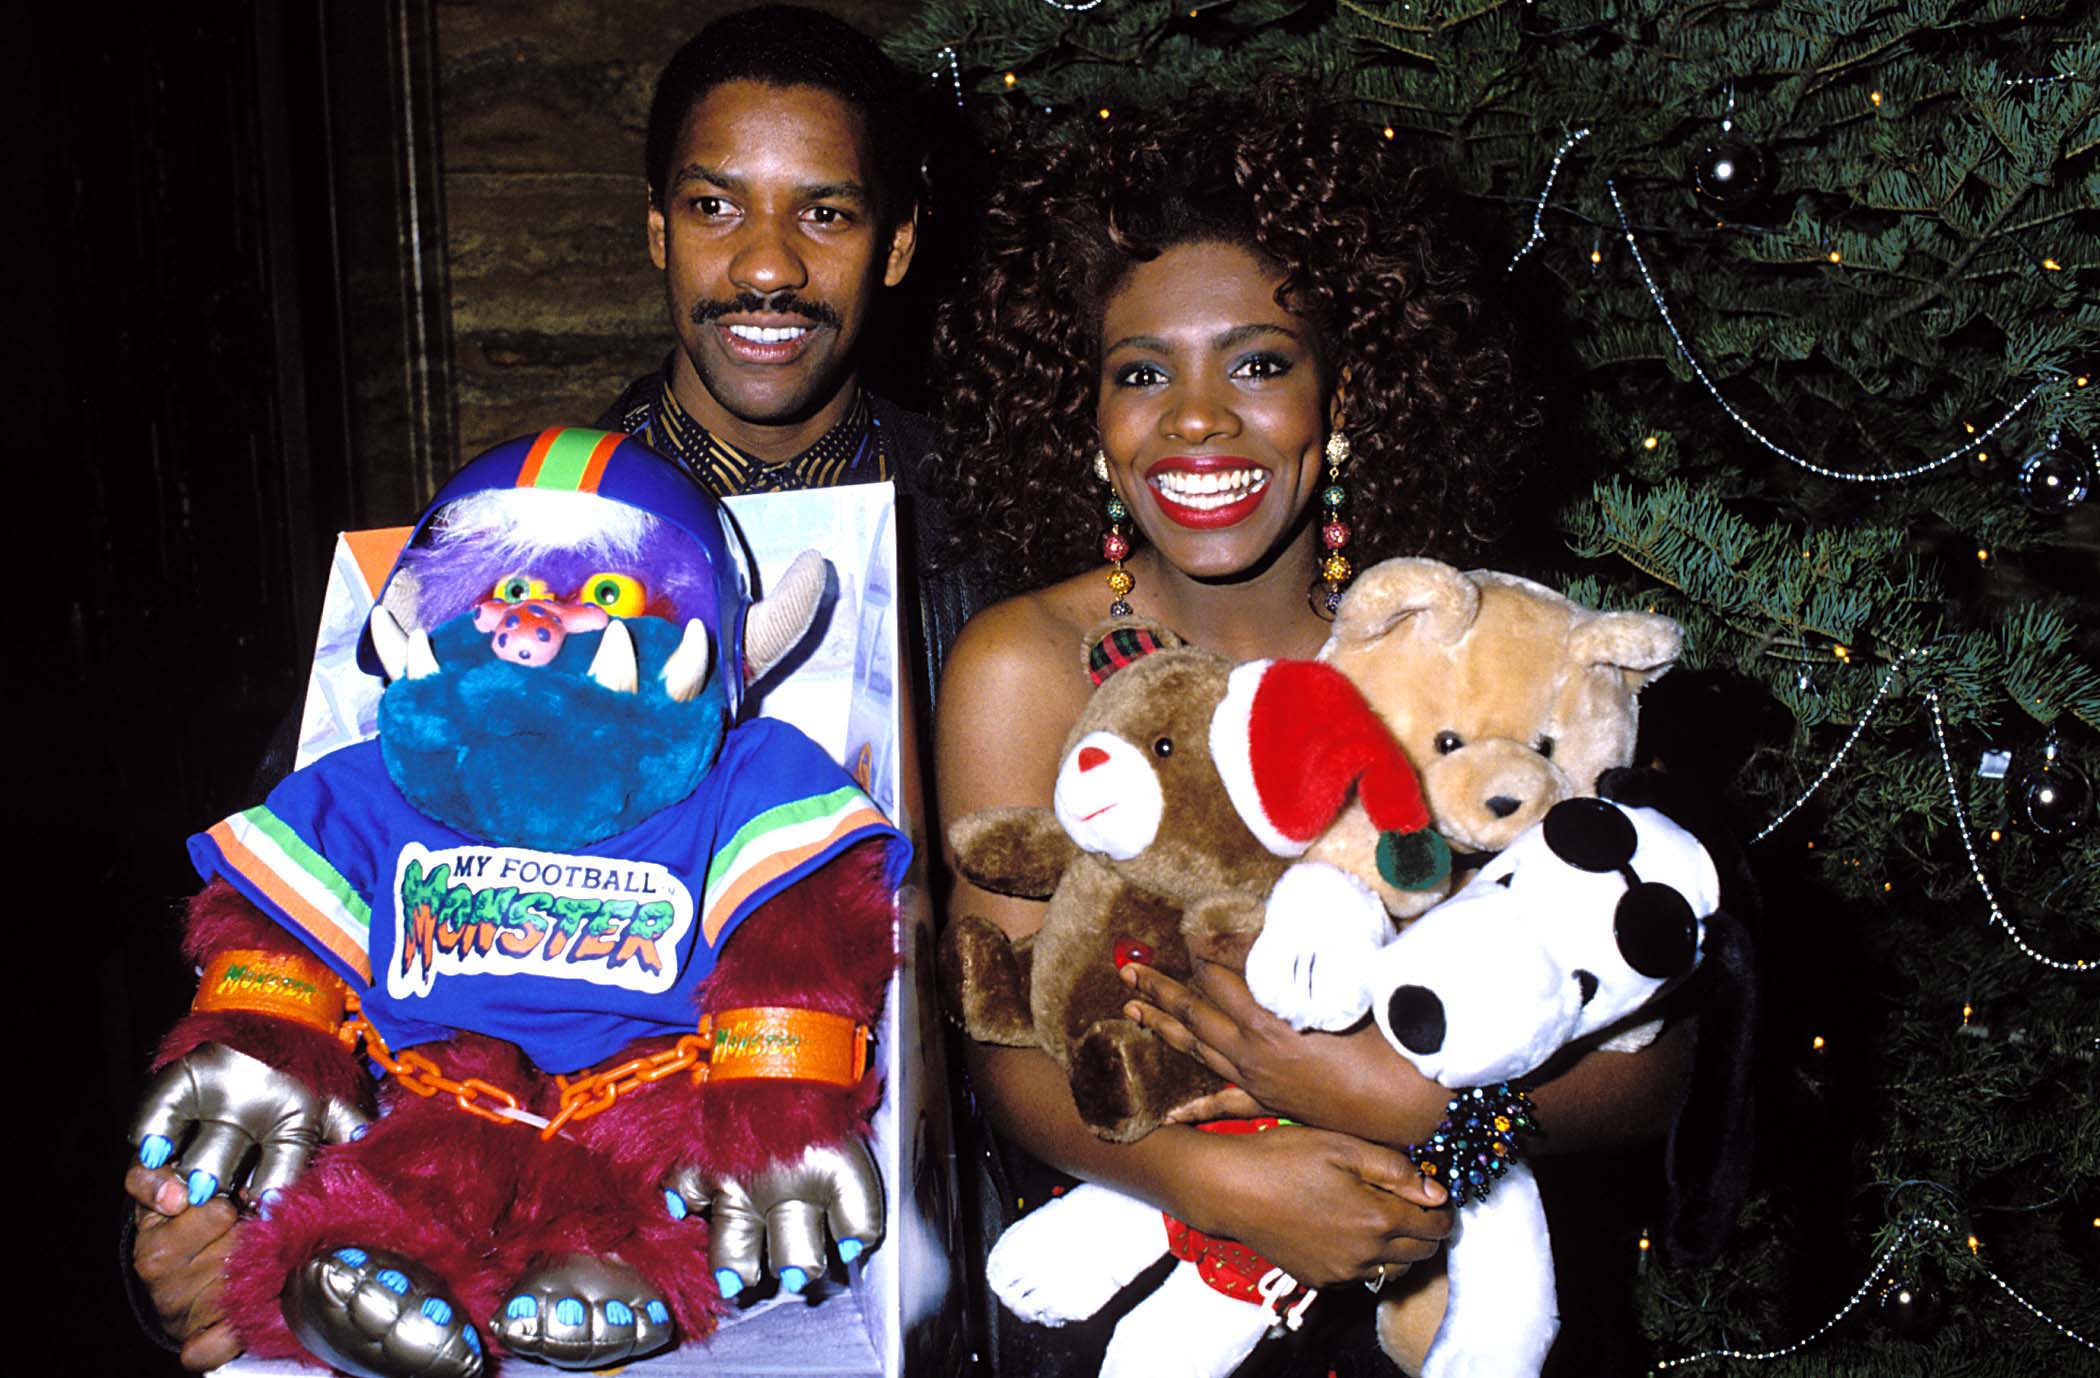 19 Moments Of Vintage Black Joy You Didn't Know You Didn't Know You Needed To See